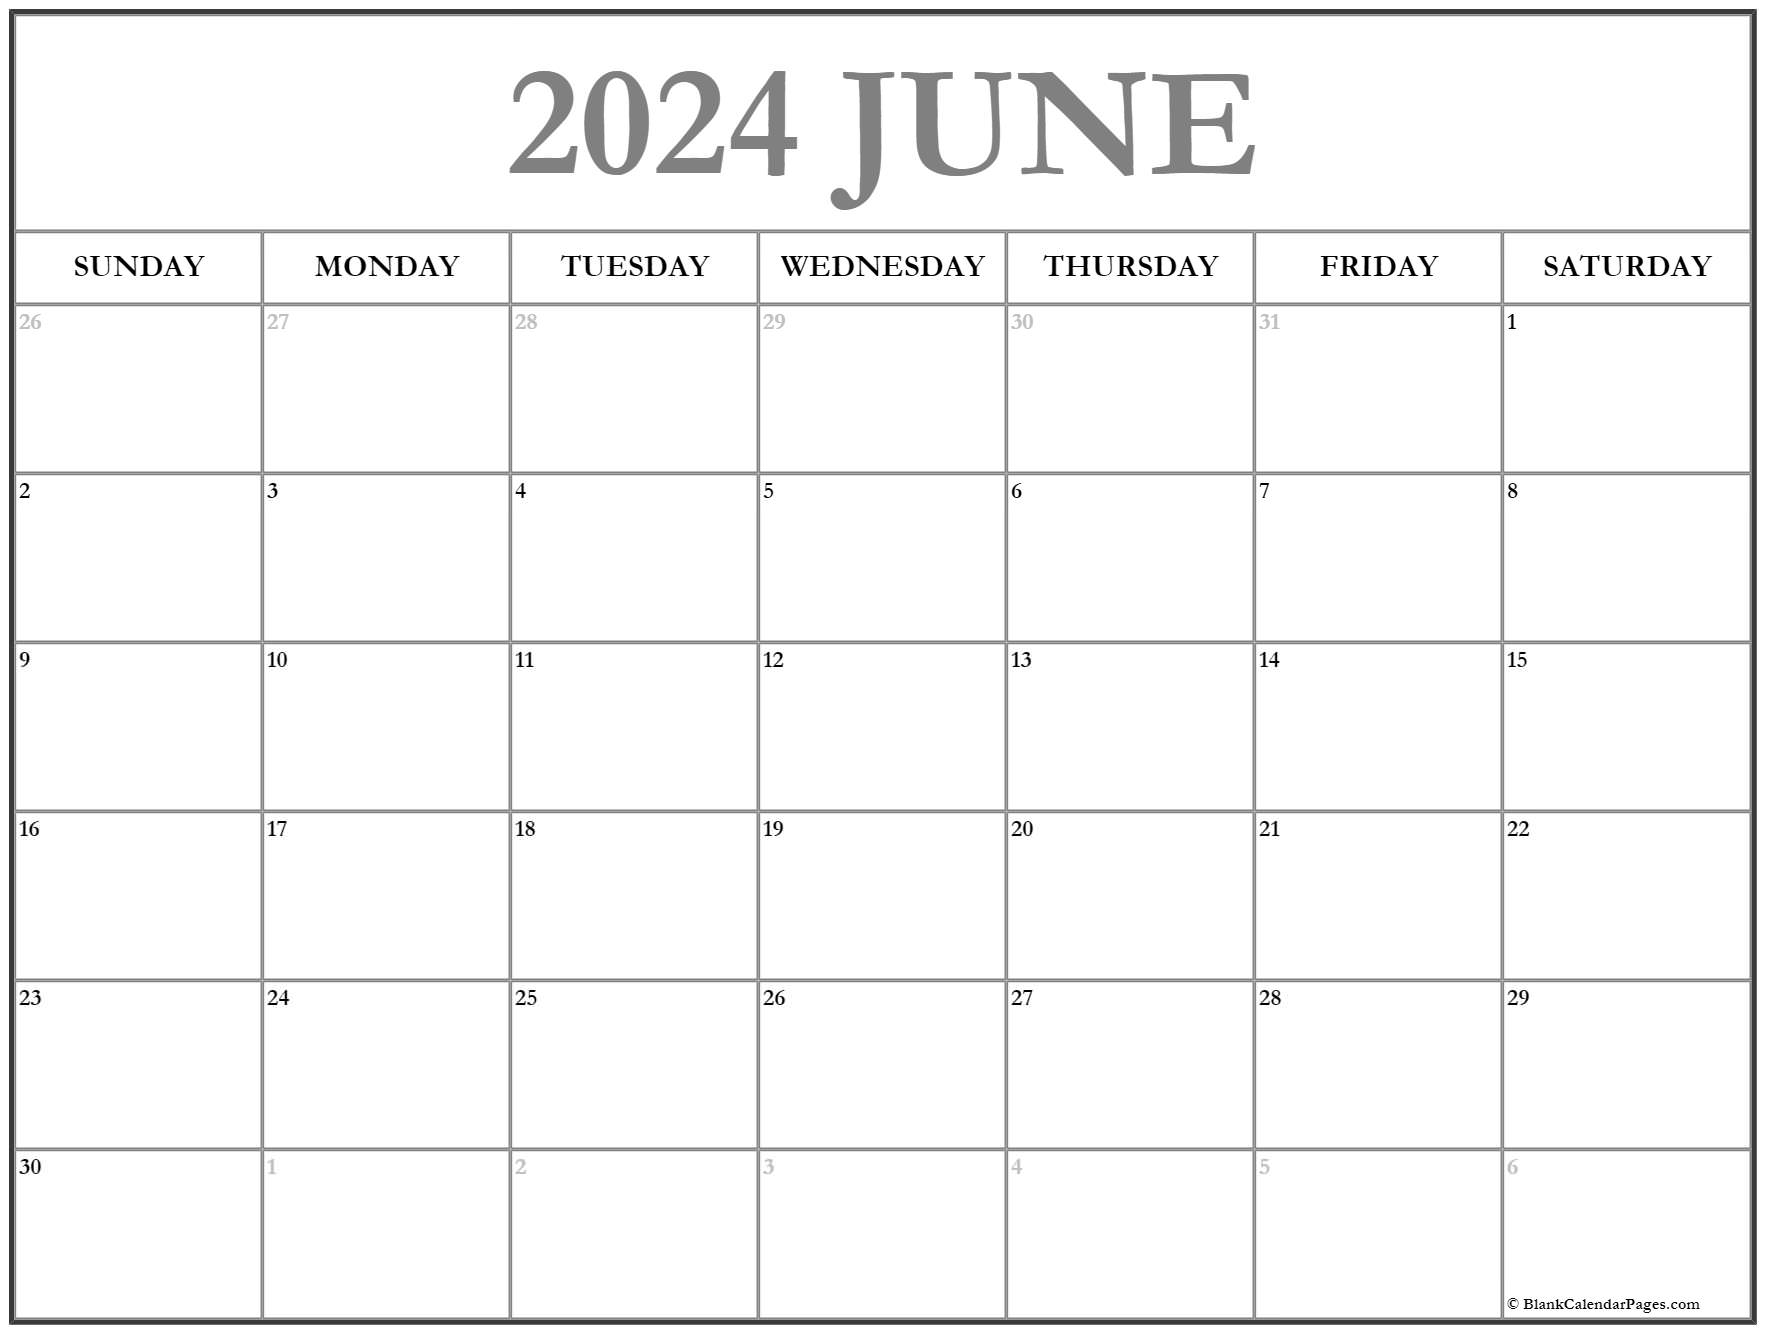 How Many Days In June 2024 Sula